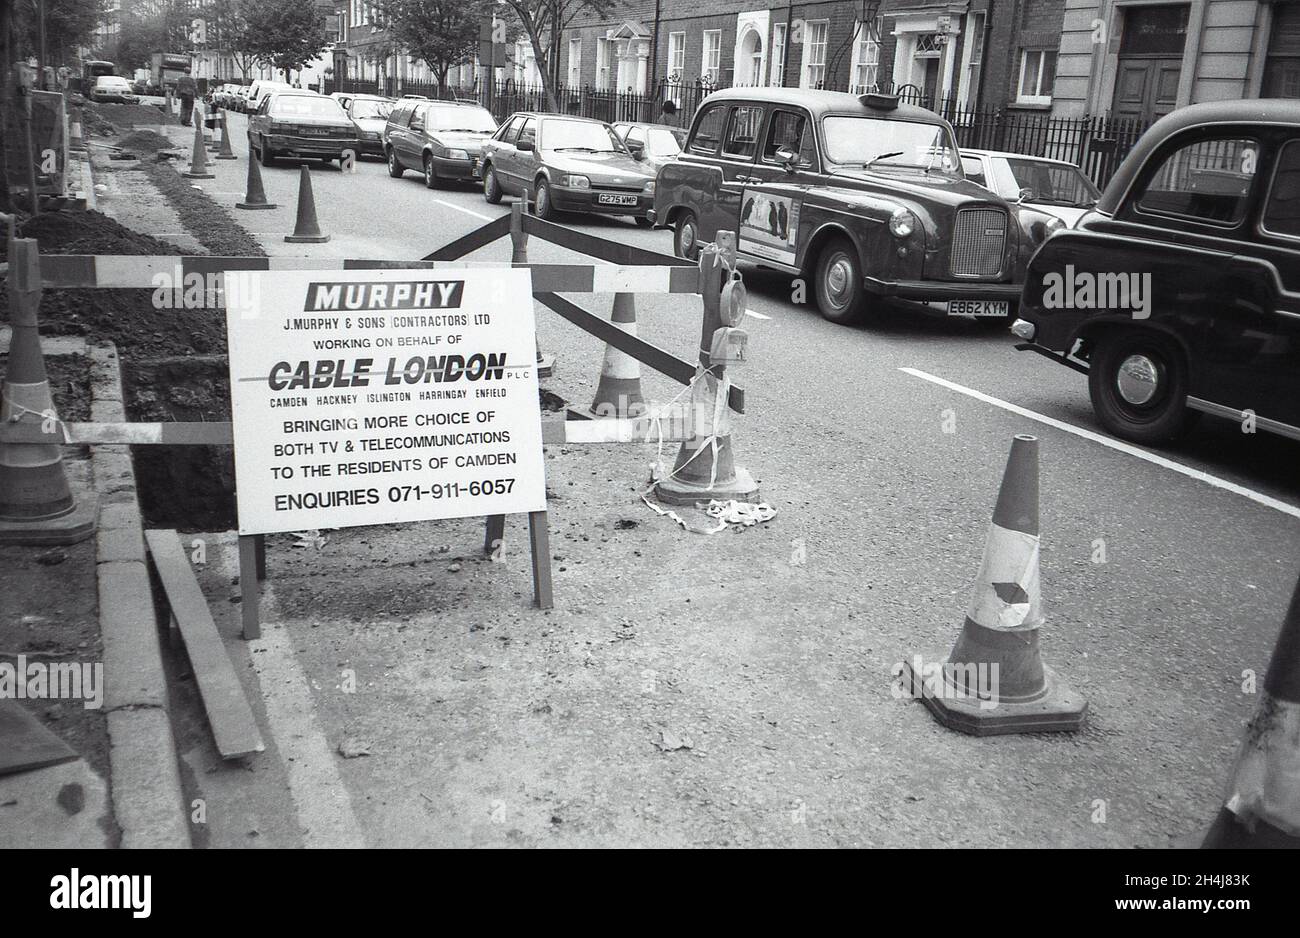 A trench dug in the road to lay cables for Cable London Limited in Camden, London on October 2, 1991. Stock Photo